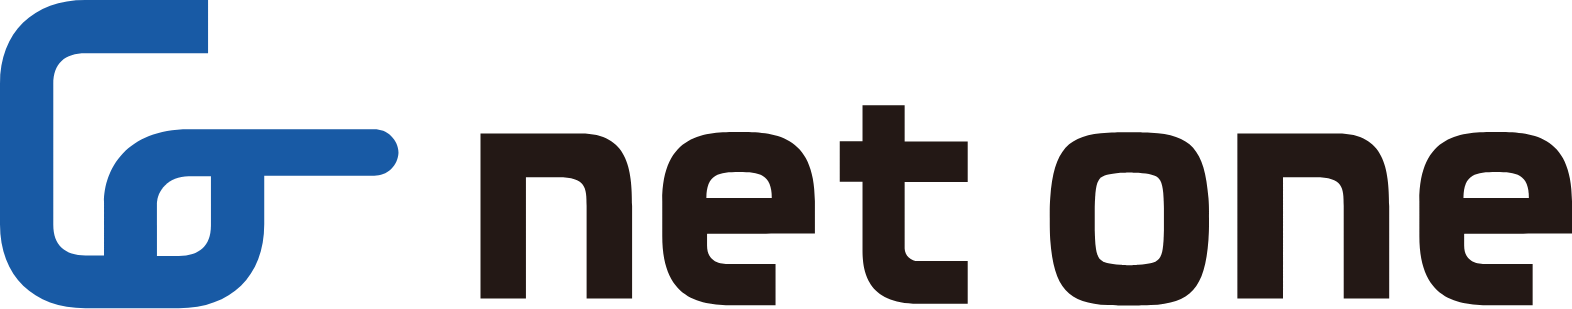 Net One Systems logo large (transparent PNG)